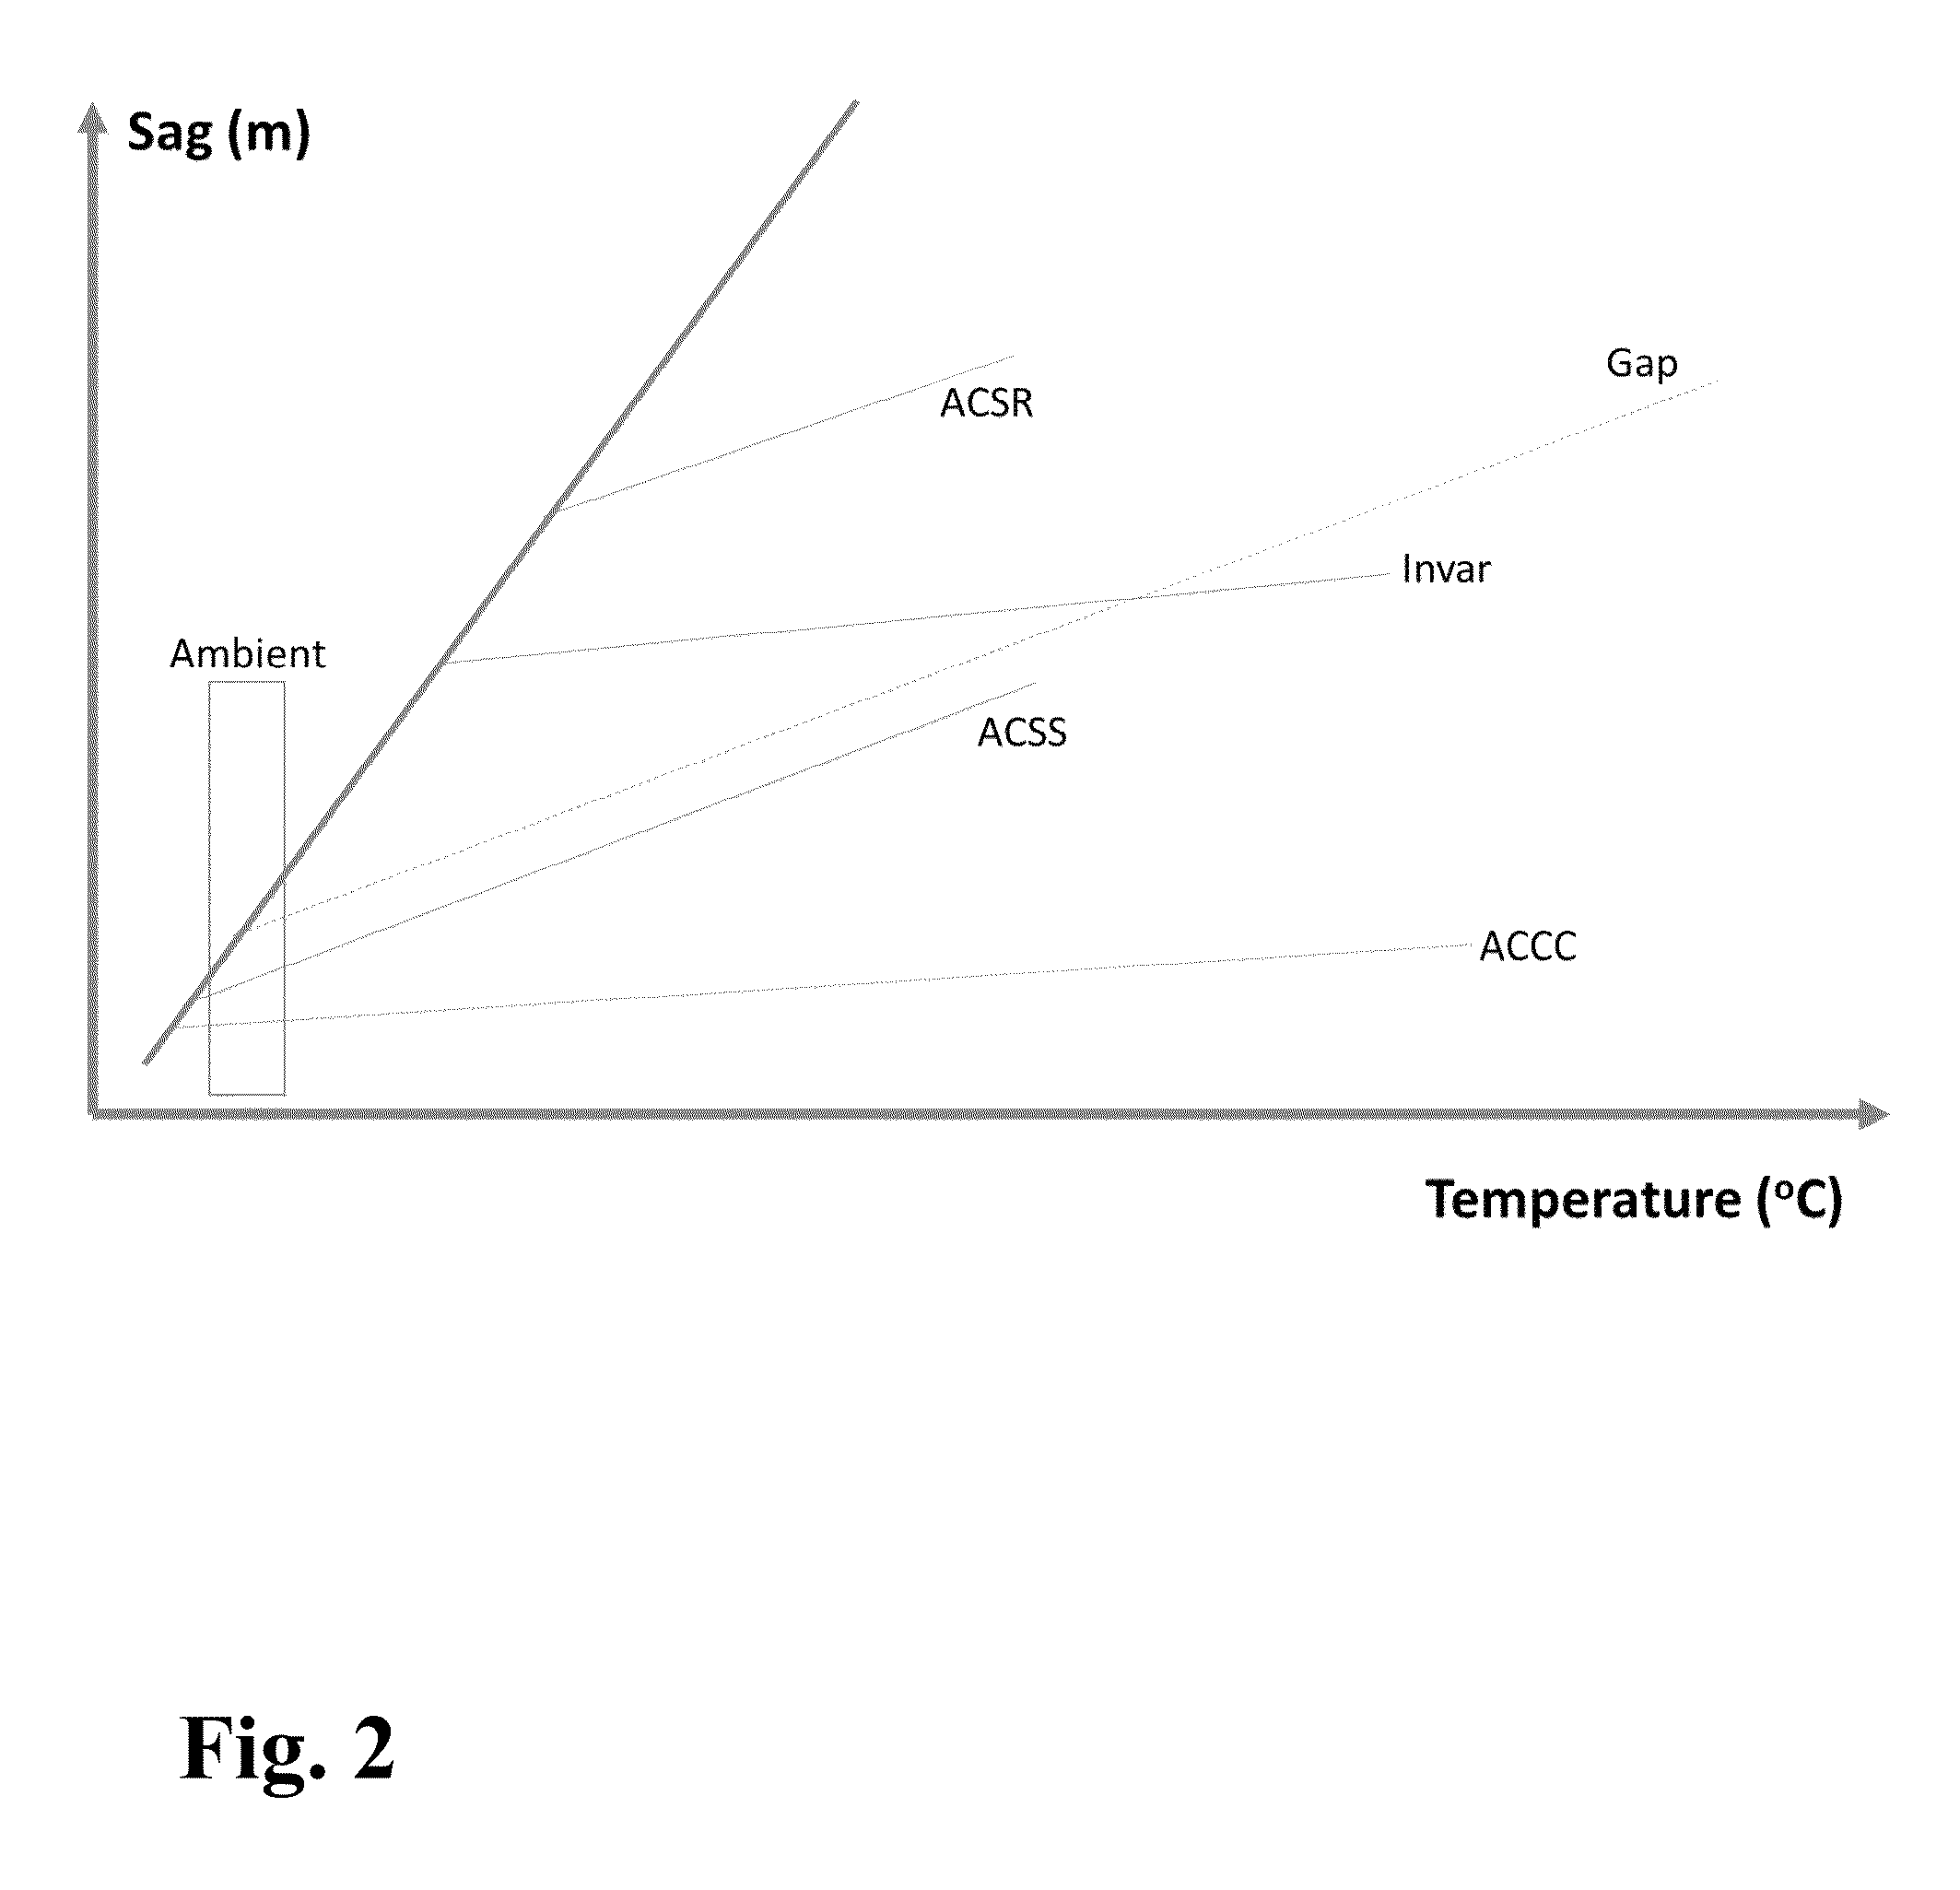 Energy Efficient Conductors With Reduced Thermal Knee Points and The Method of Manufacture Thereof